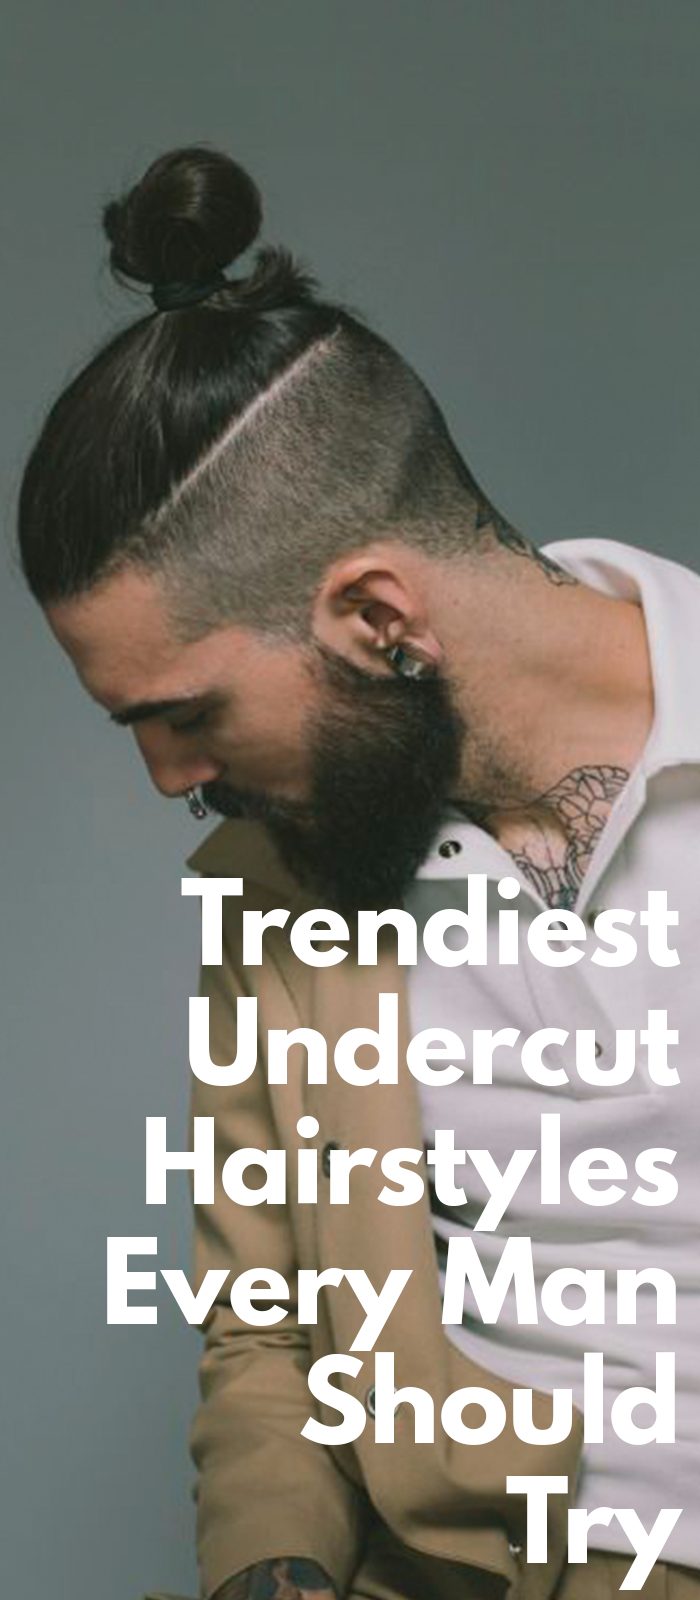 Trendiest Undercut Hairstyle Every Man Must Try ⋆ Best Fashion Blog For Men  